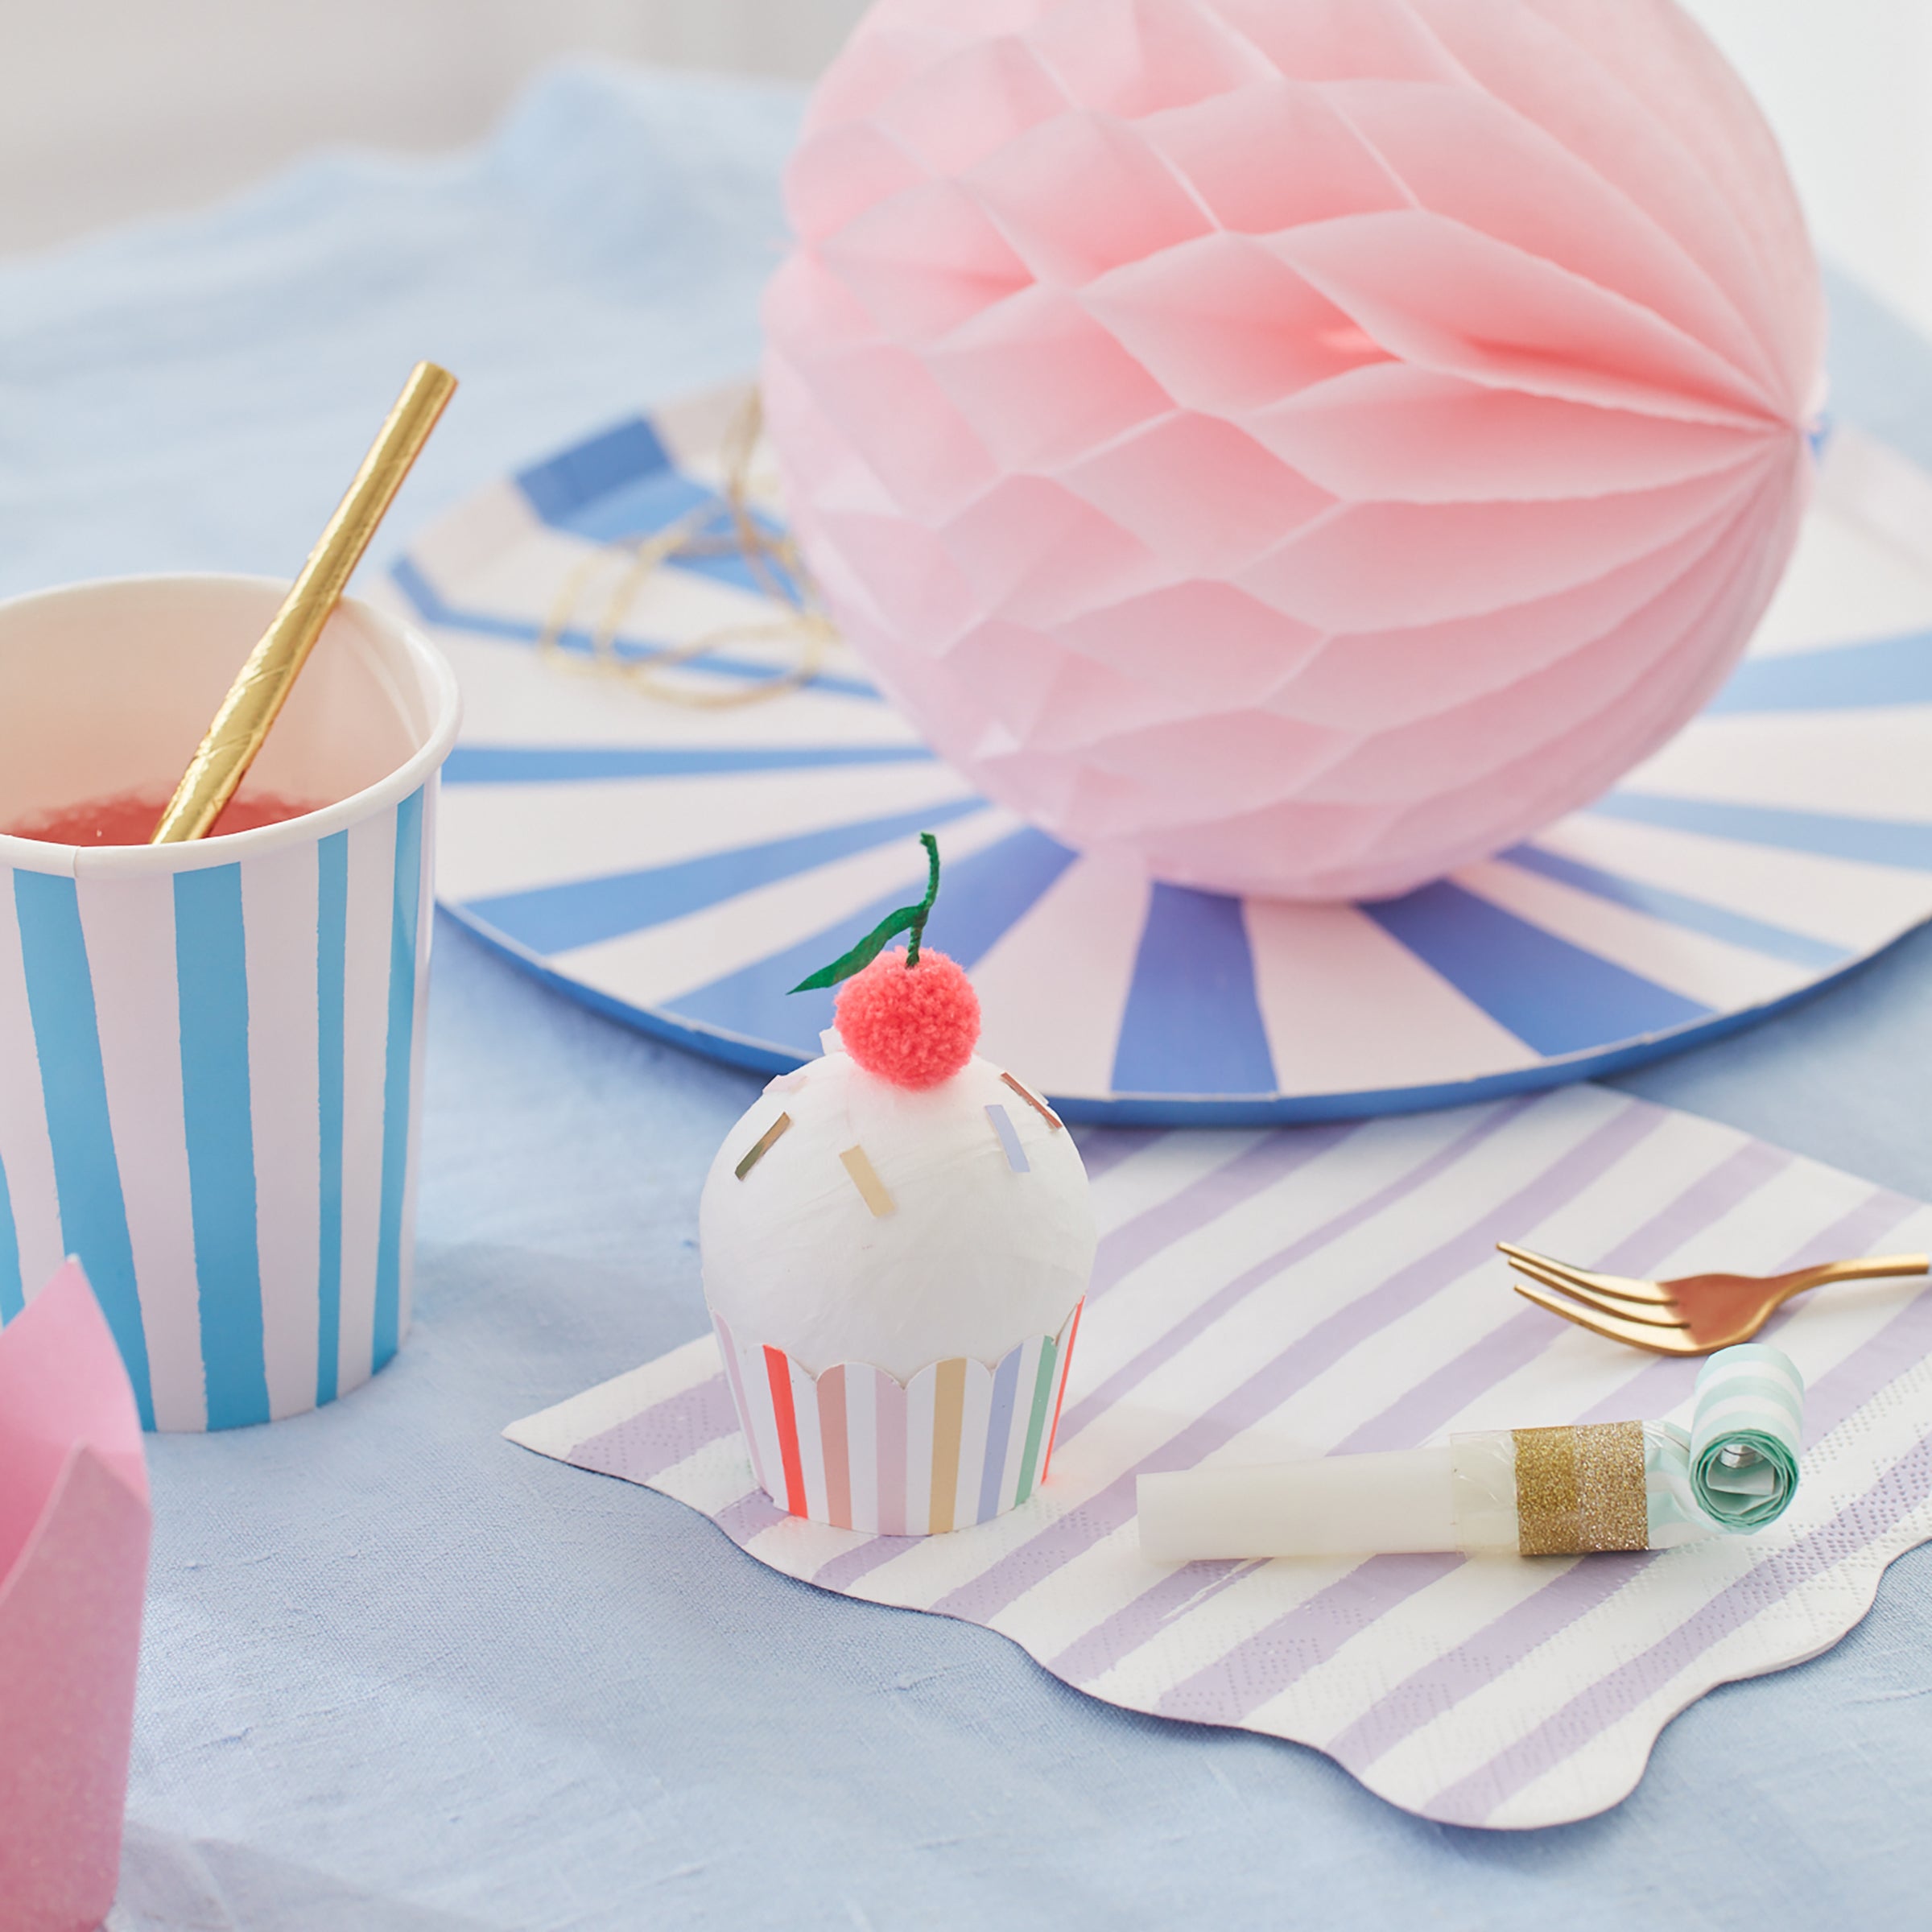 This party favours are cleverly crafted to look like cupcakes, and contain temporary tattoos for kids and friendship bracelets.